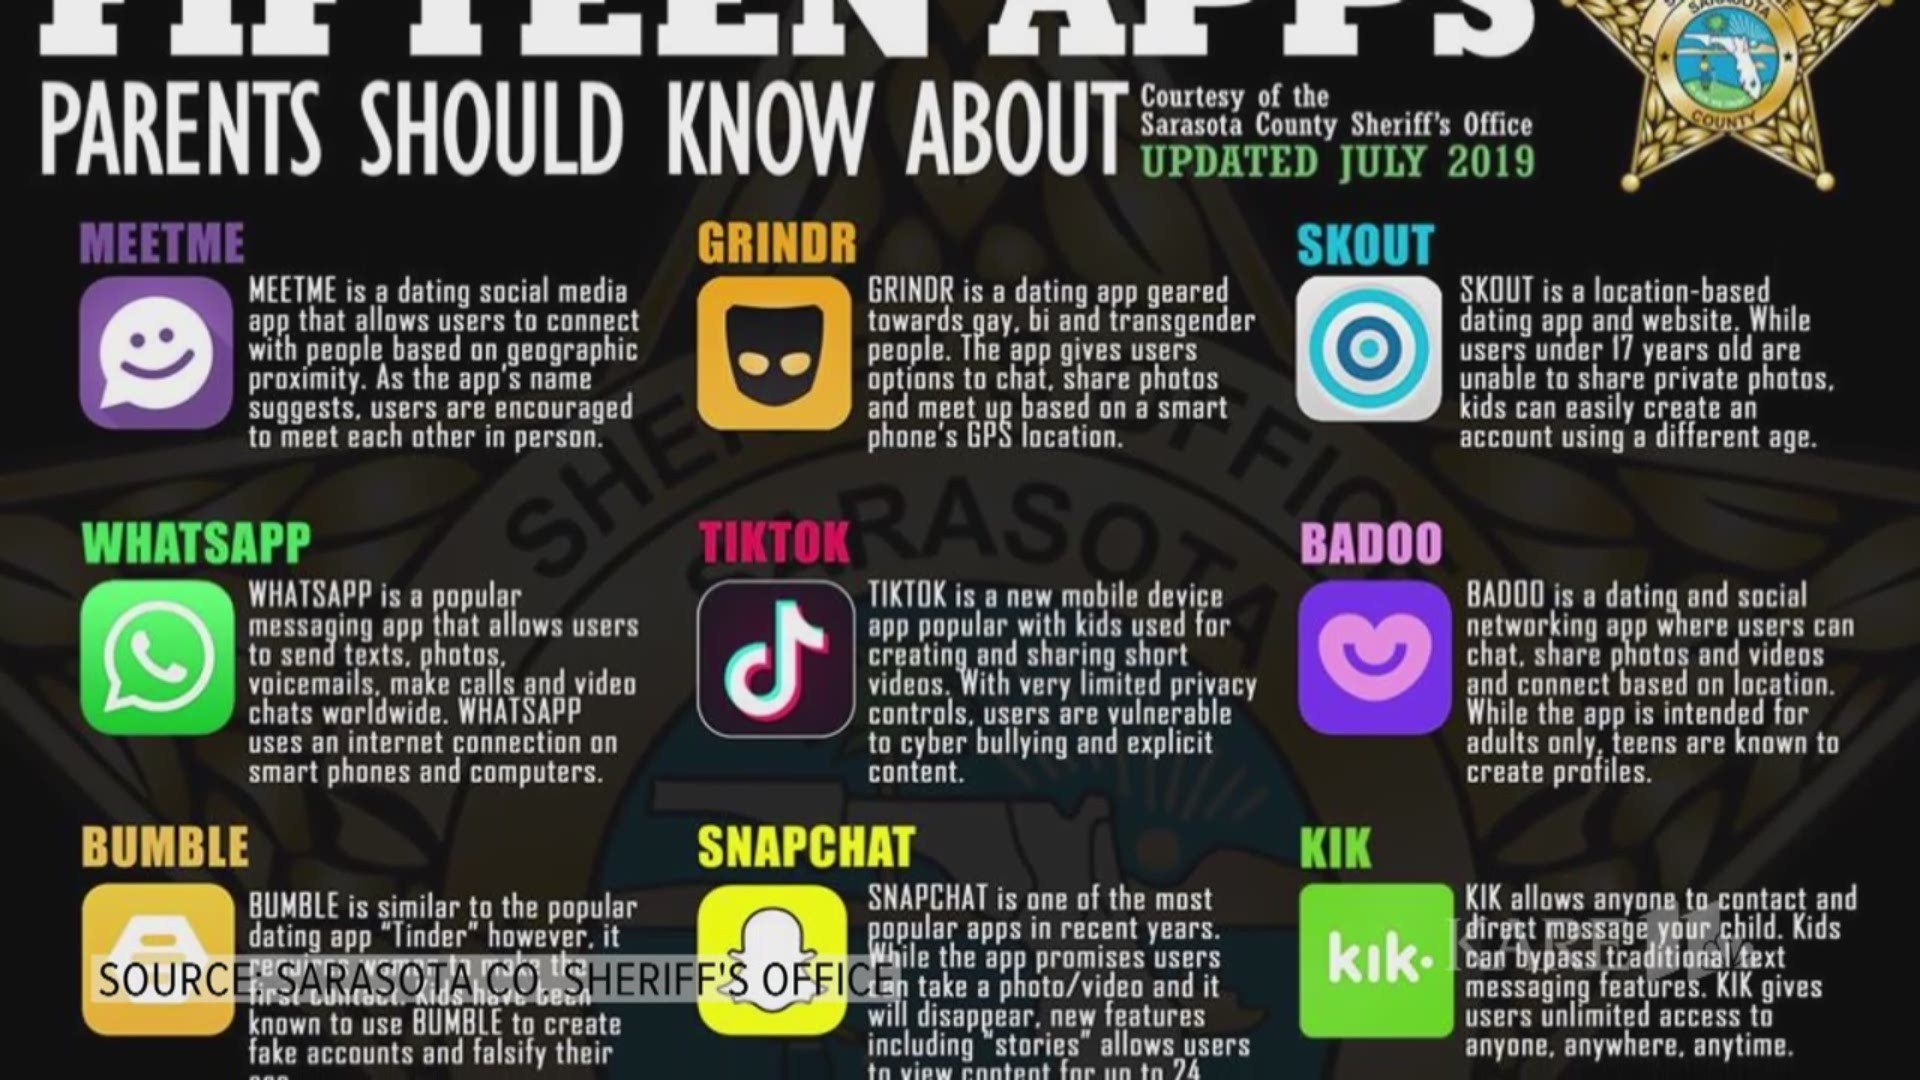 The Sarasota Co. (FL) Sheriff's Office warned about several apps popular with kids, following a sting operation for online predators.